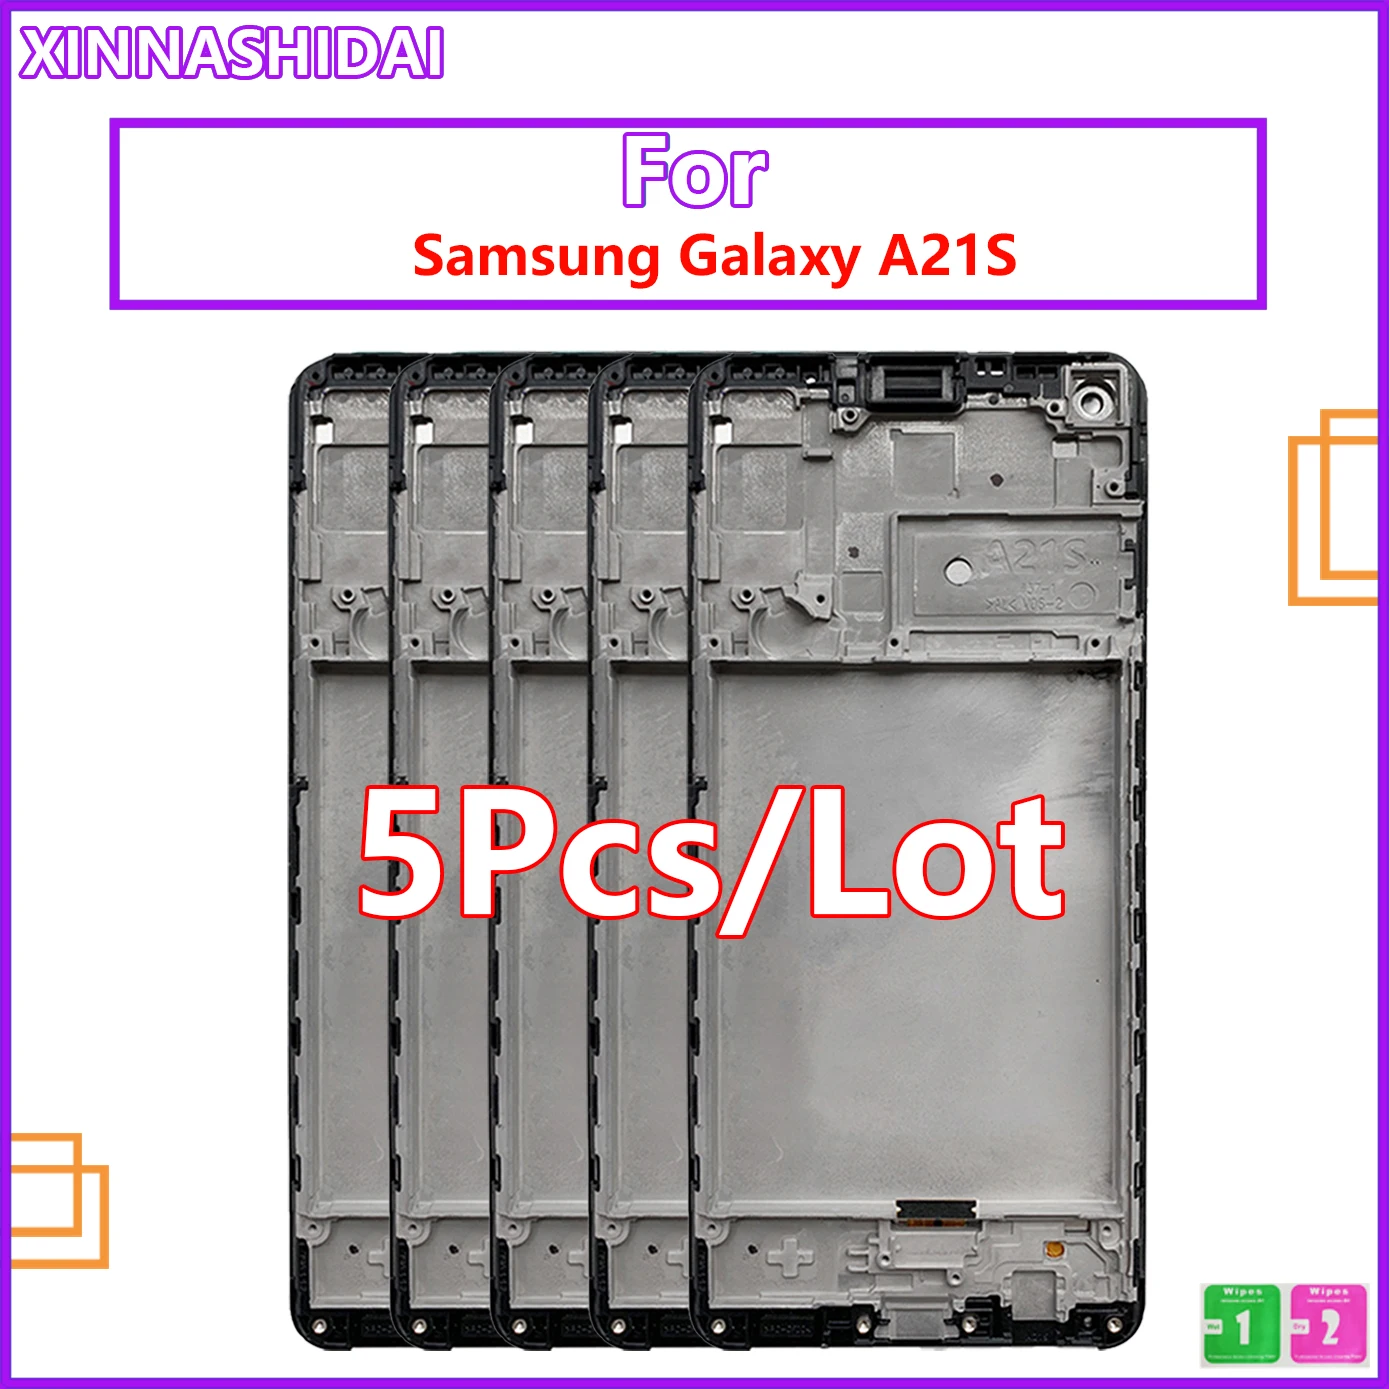 

5pcs/lot 100% Tested For Samsung Galaxy A21S A217F A217 Touch Screen Digitizer Display For Galaxy A21S LCD A217F/DS A217H